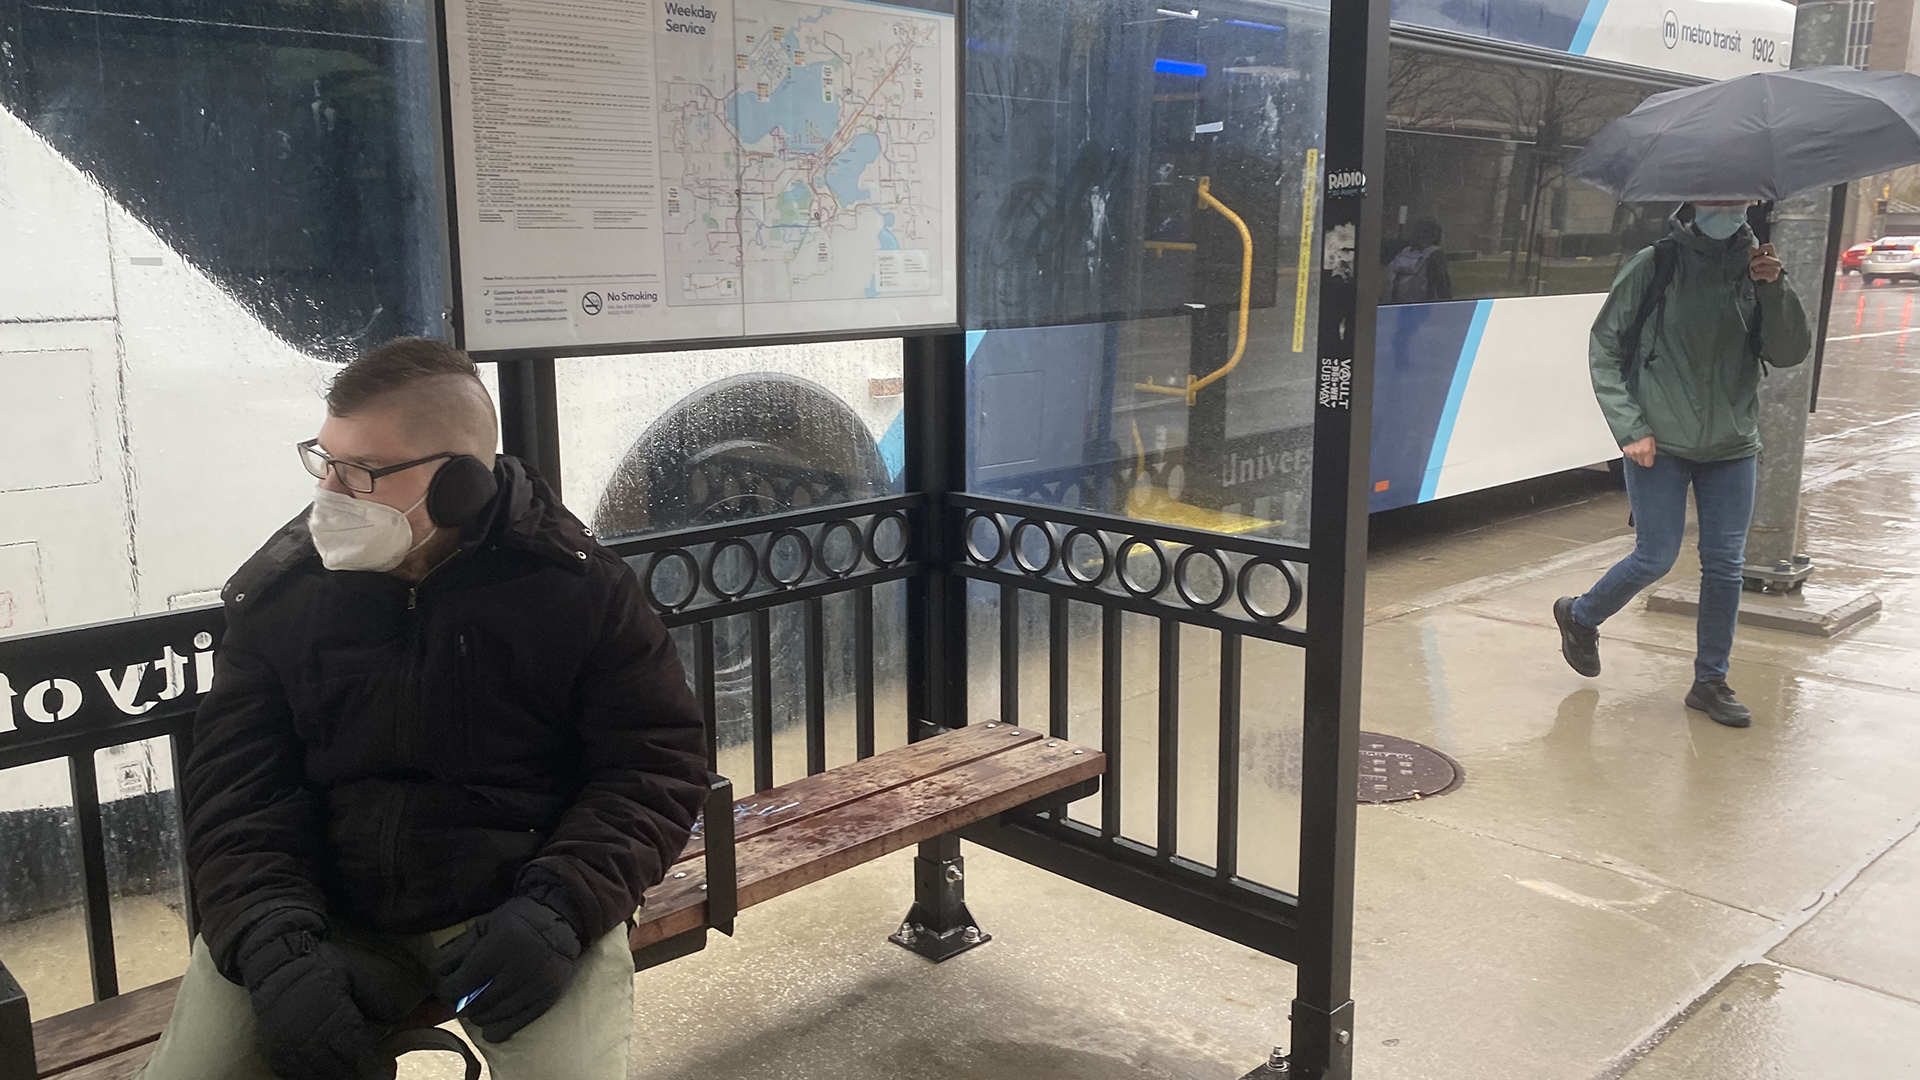 Wisconsin’s Covid Condition: Most public transportation goes mask-optional amid rising case counts